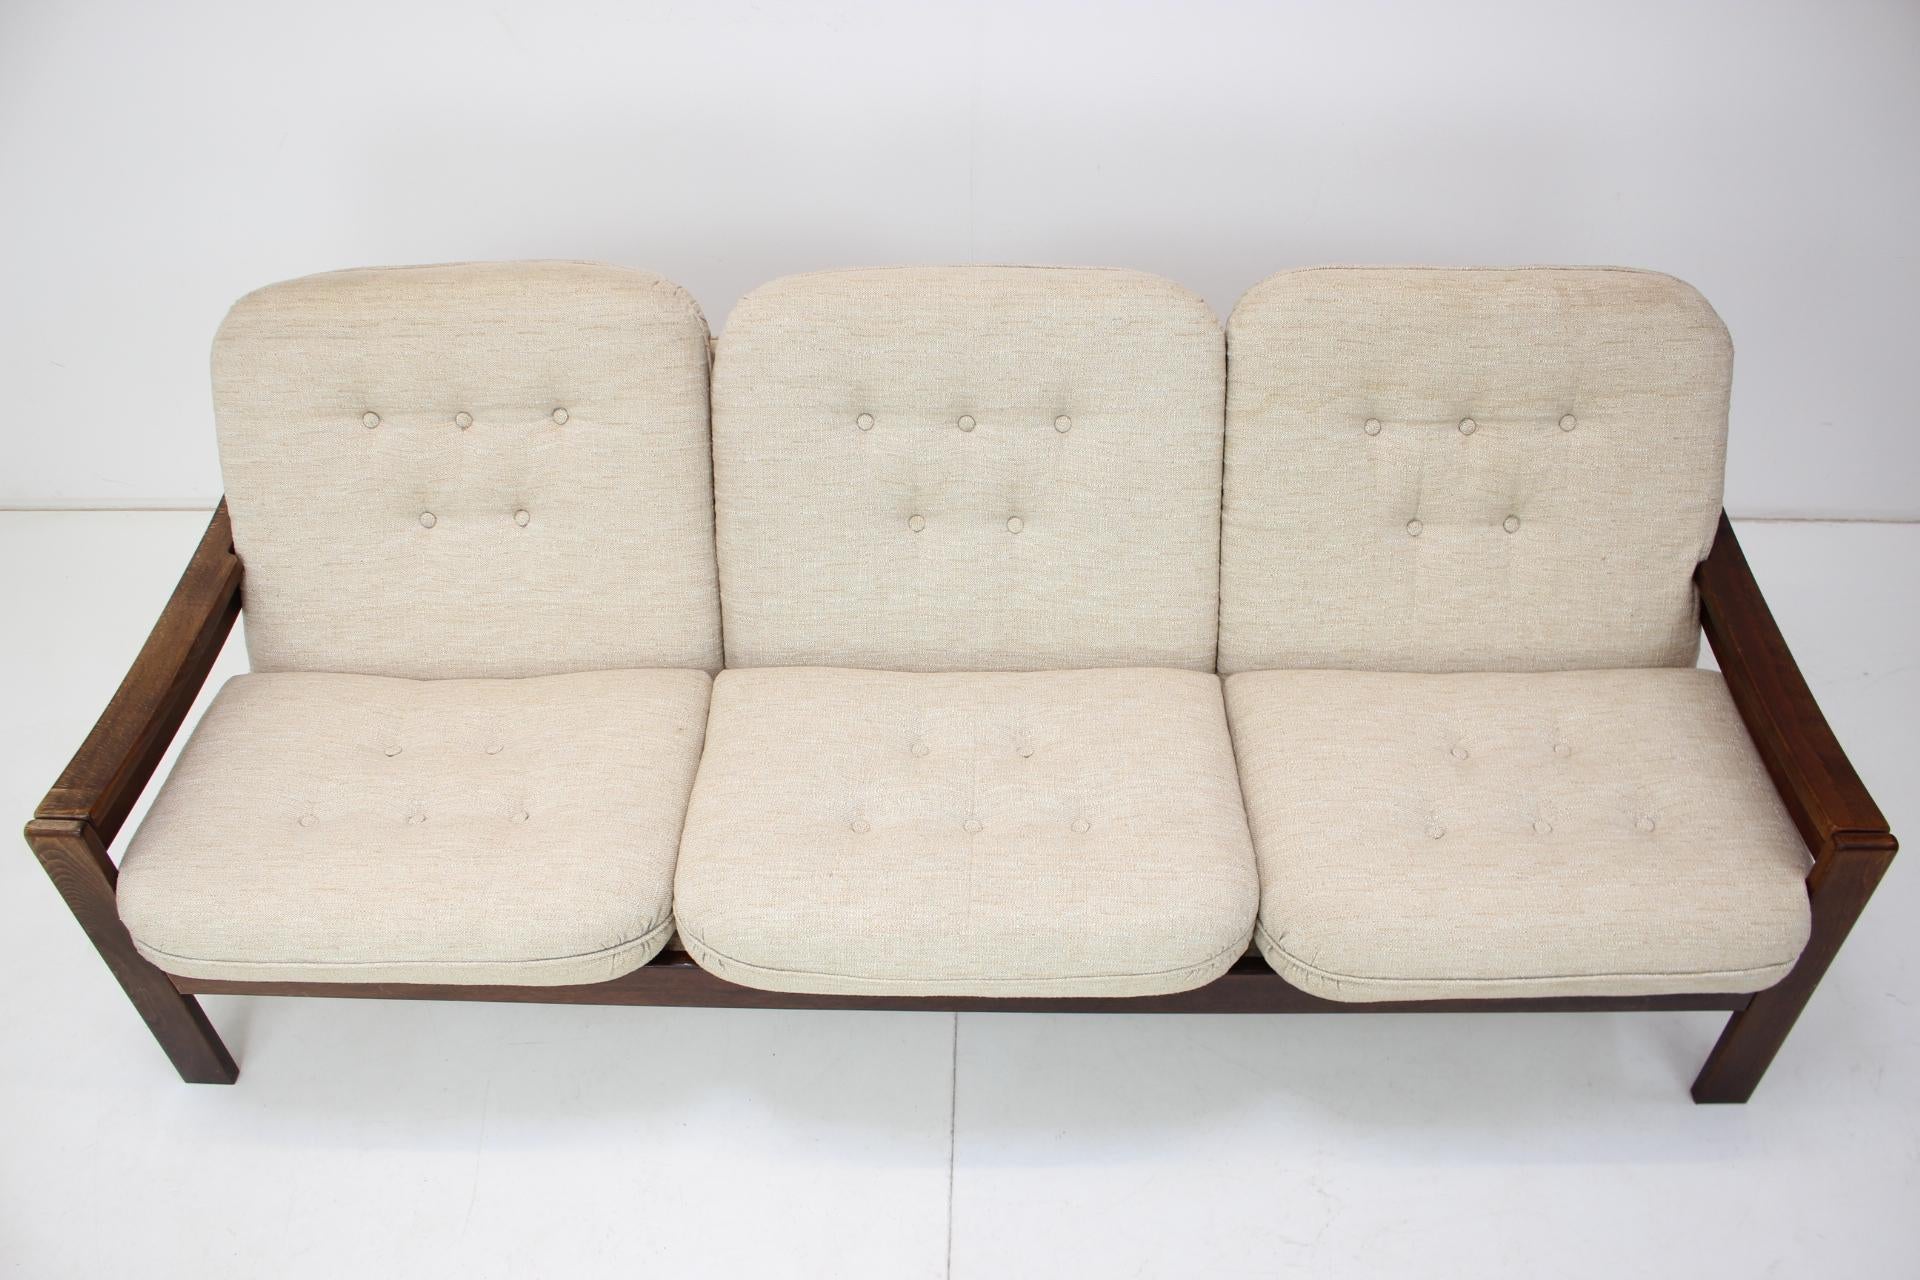 - Good original condition
- The pillows have stains on one side
- Manufacturer Hikor Písek 1987
- Seat height 44 cm
- Dimensions when unfolded, depth 106 cm, length 191 cm.